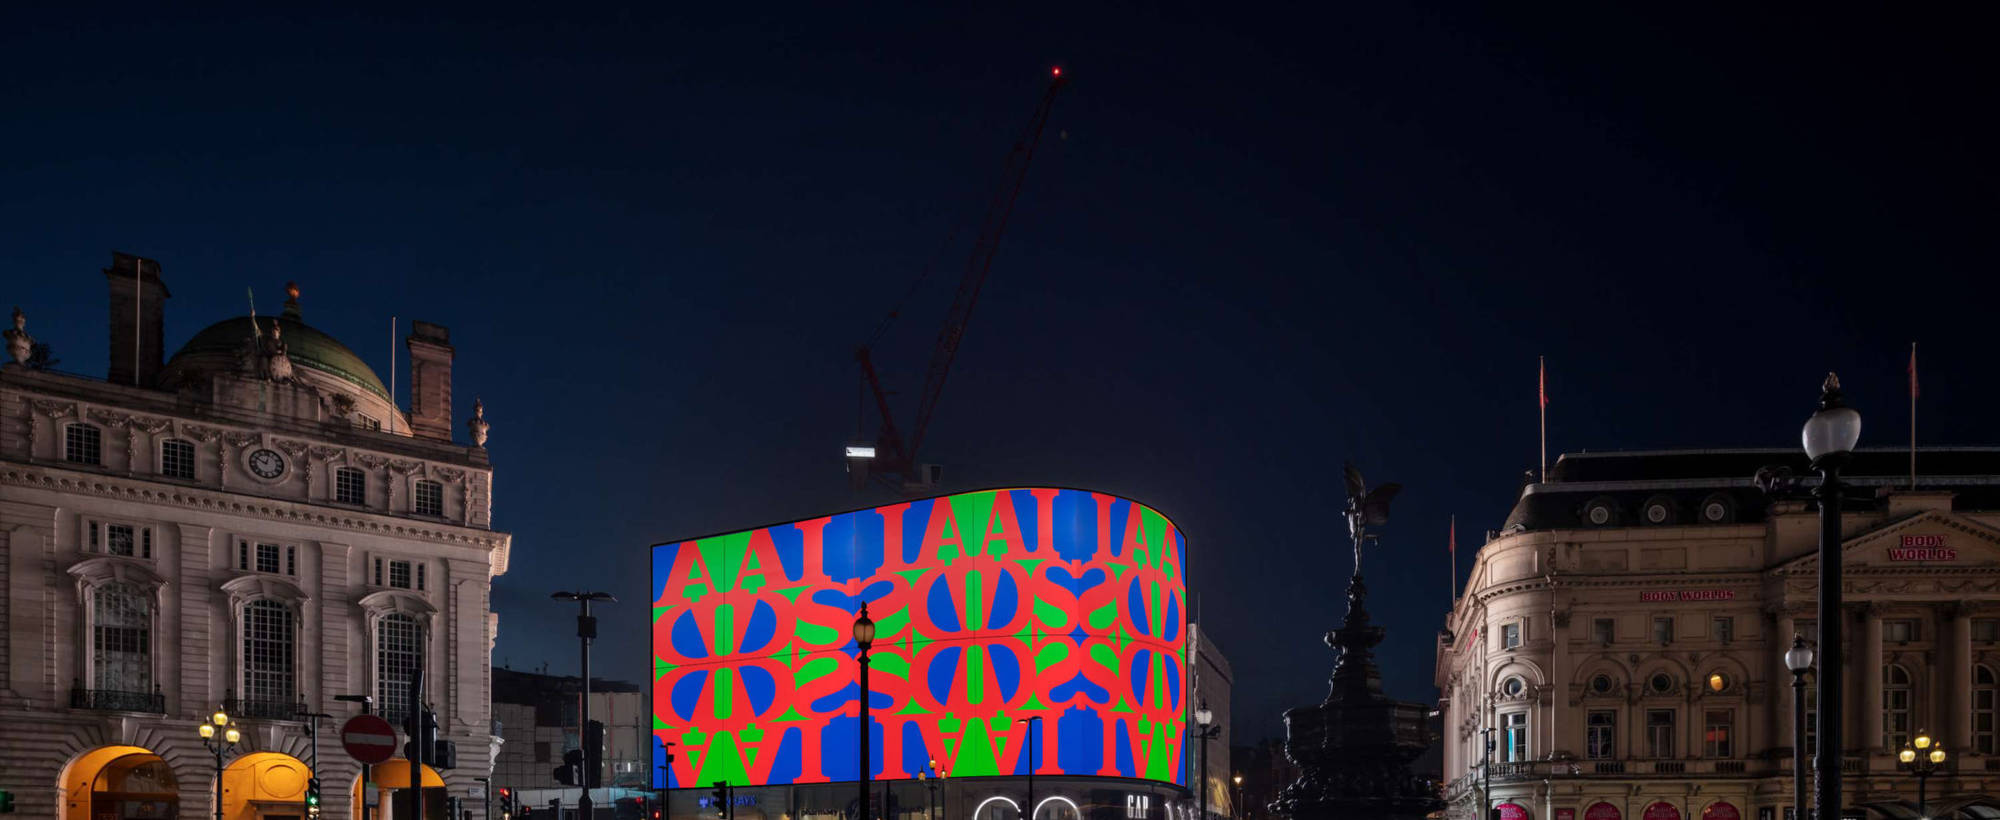 London Piccadilly Lights Rendering Video Virus by AA Bronson General Idea CIRCA 1